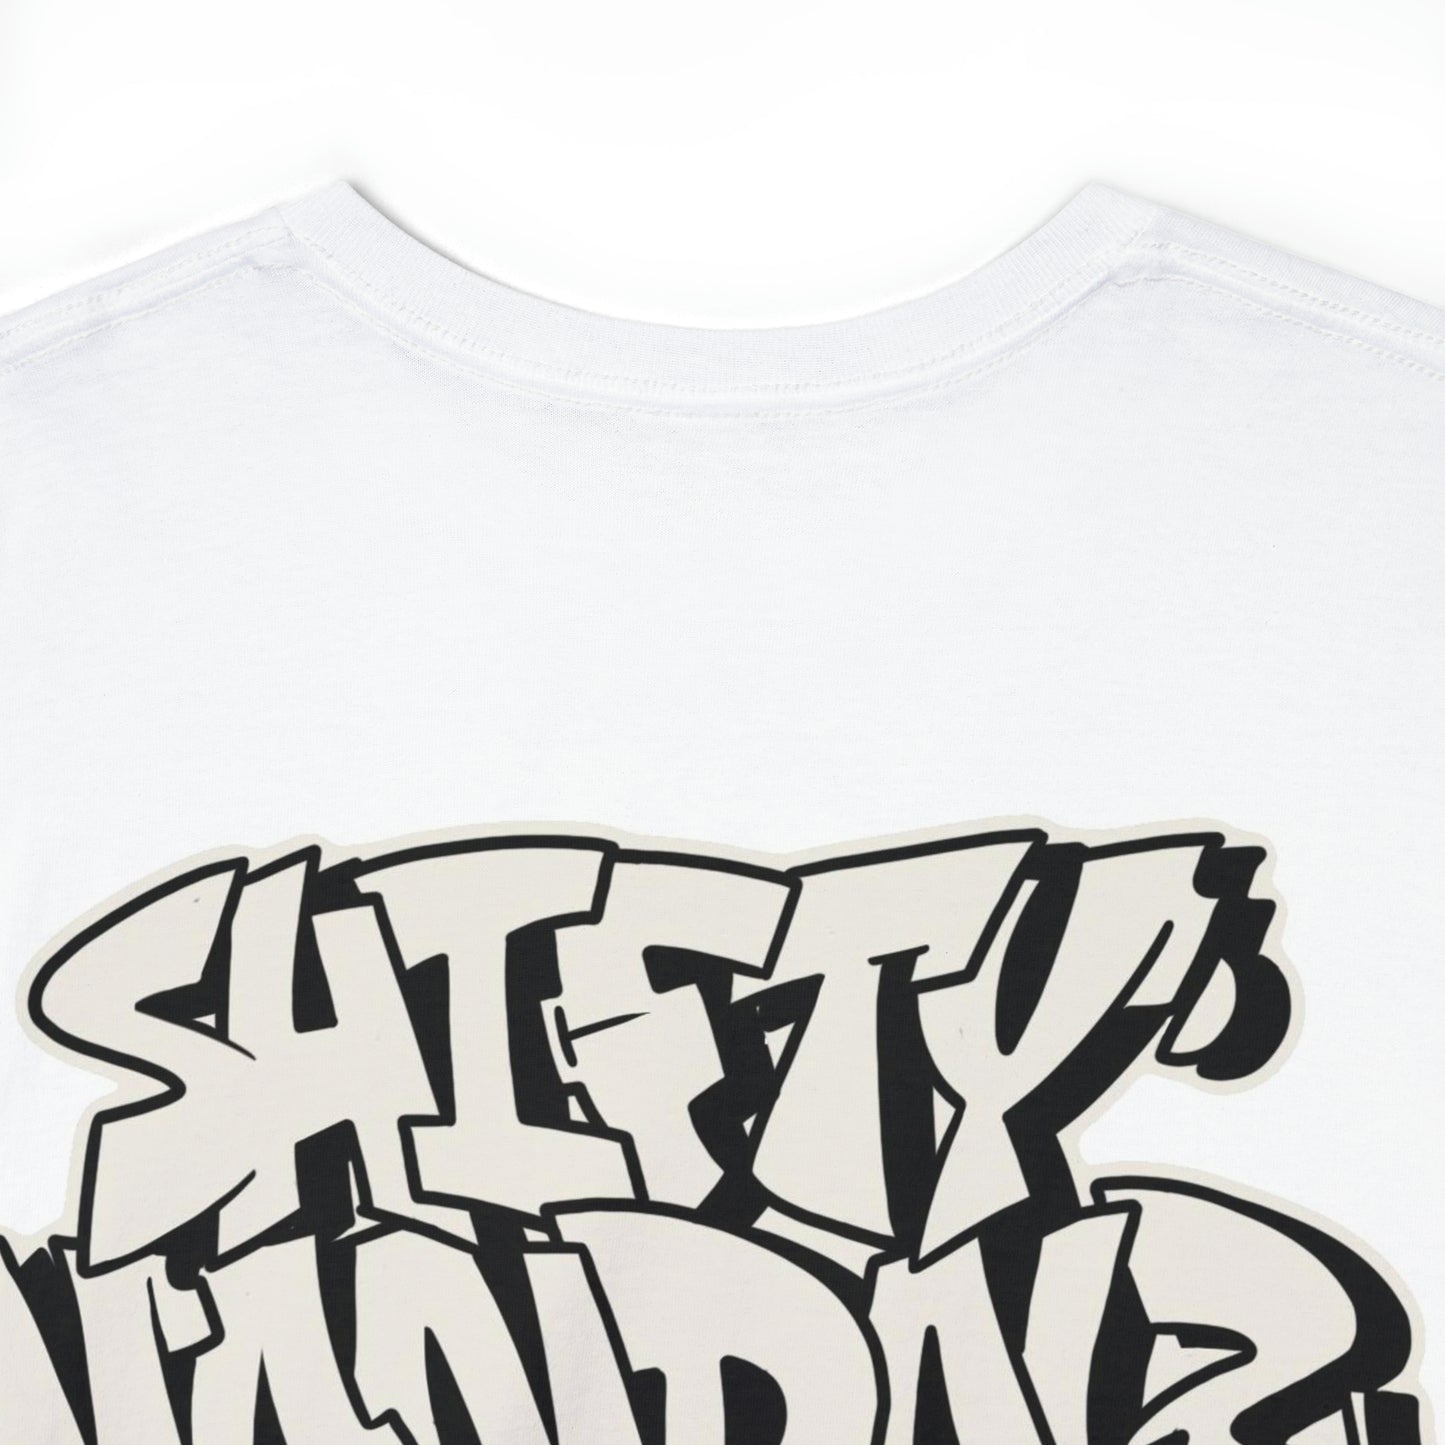 Official Shifty vandals tee(images switched)